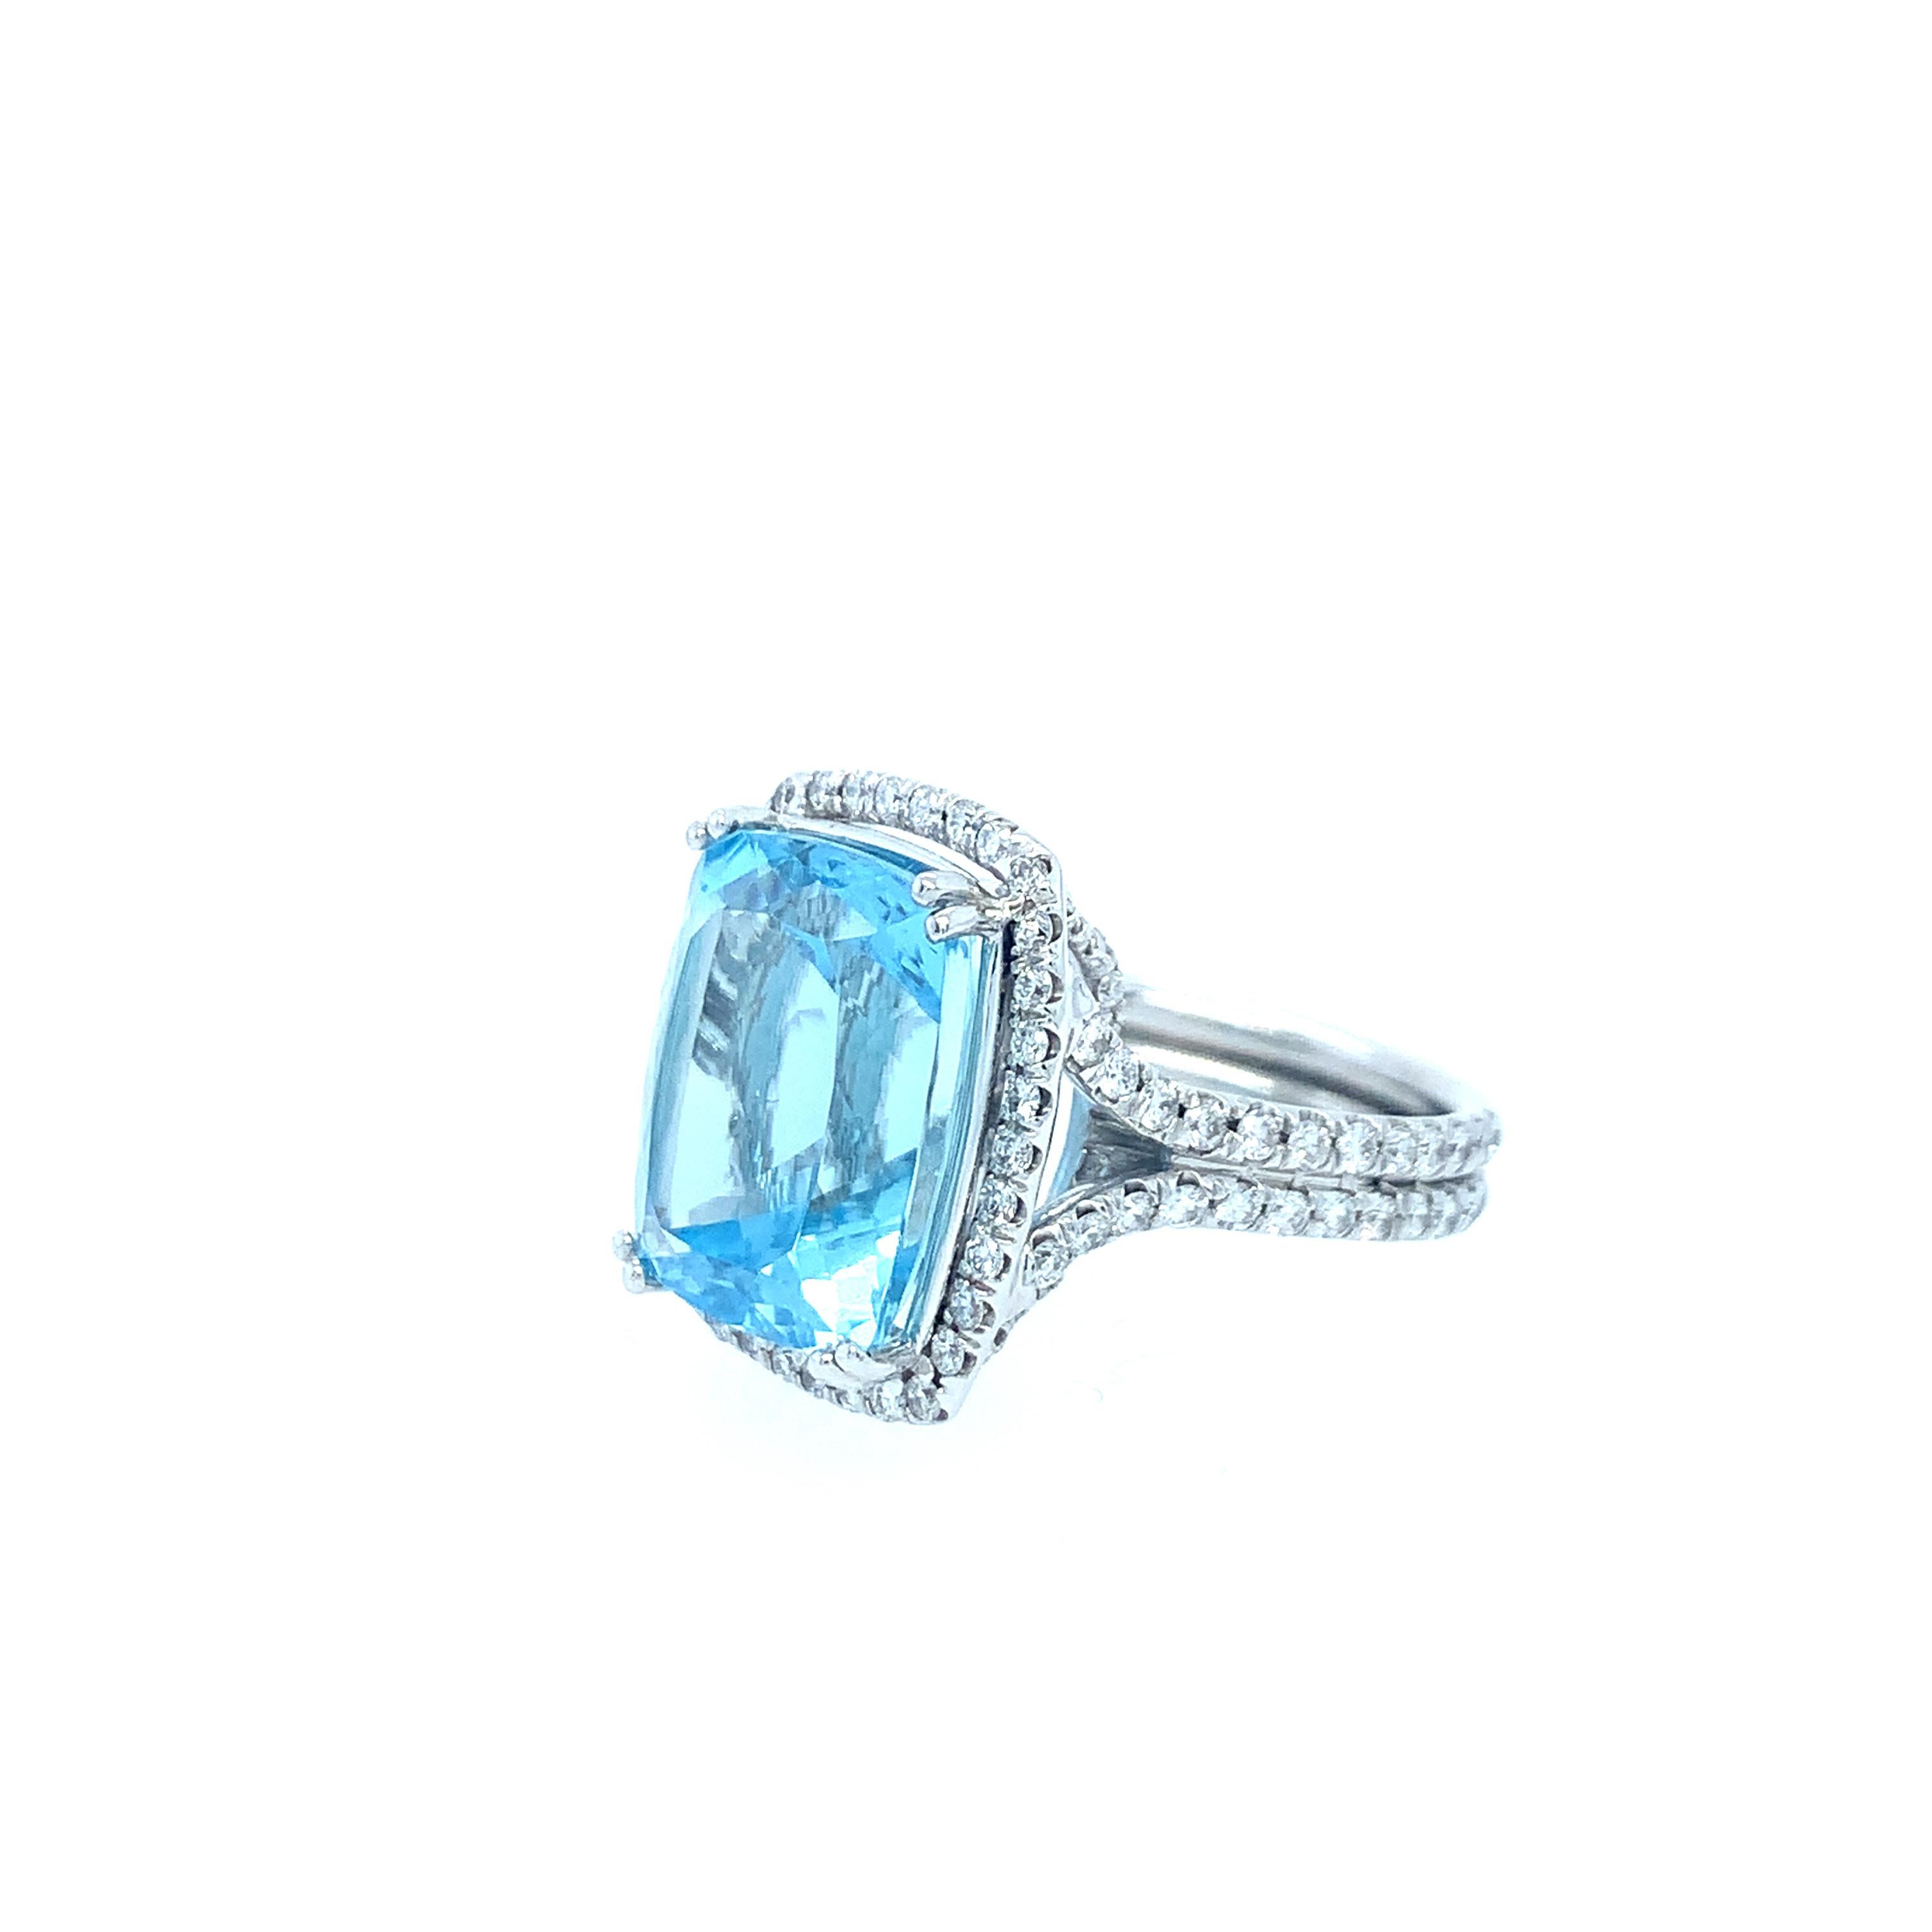 A stunning 10.77ct aquamarine center surrounded by a double halo of diamonds weighing a total of 1.27ct. The center aqua is a cushion cut stone surrounded by round brilliant cut diamonds. The mounting is 18K white gold and contrasts effortlessly